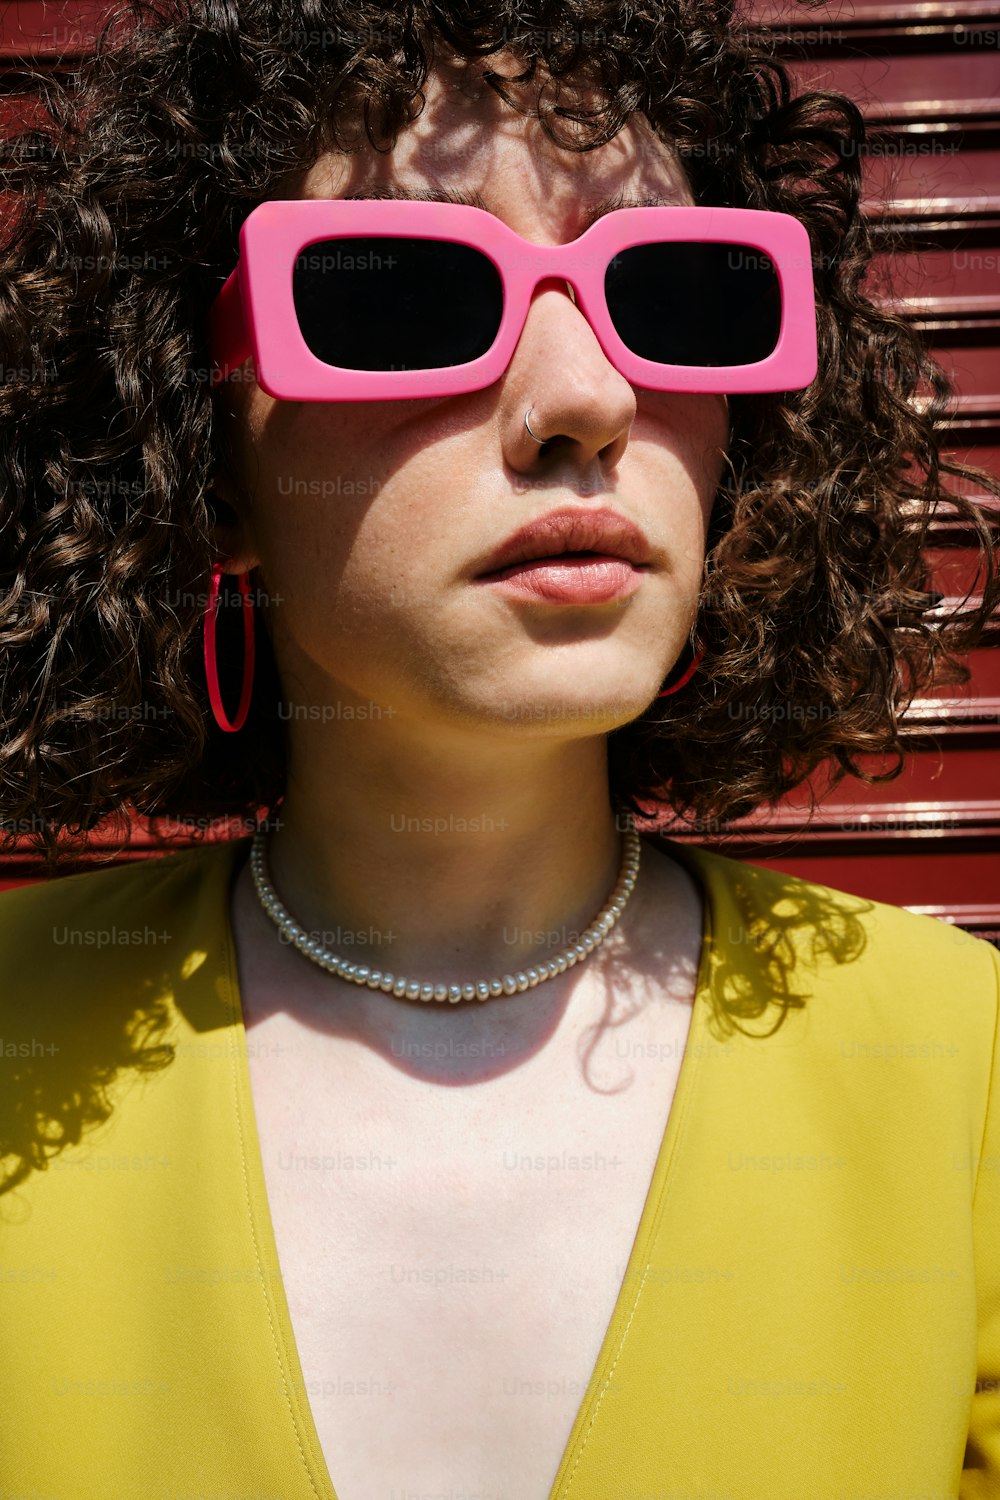 a woman with curly hair wearing pink sunglasses